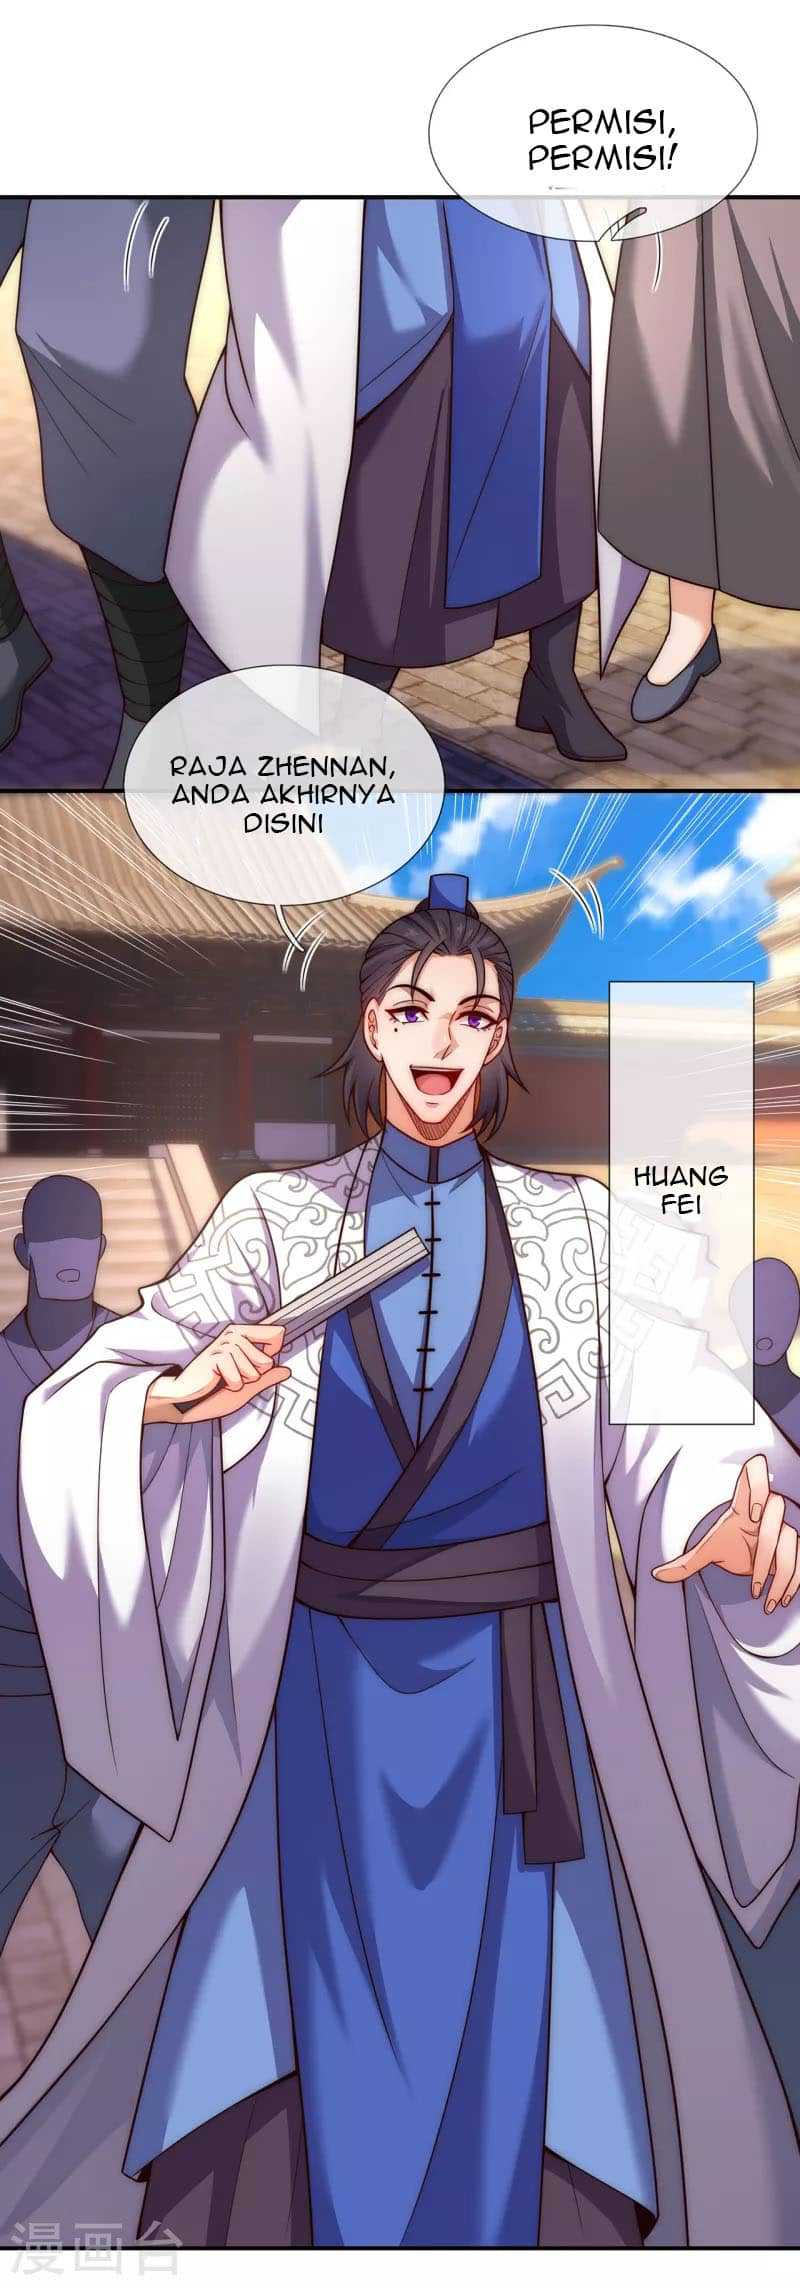 Xuantian Supreme Chapter 15